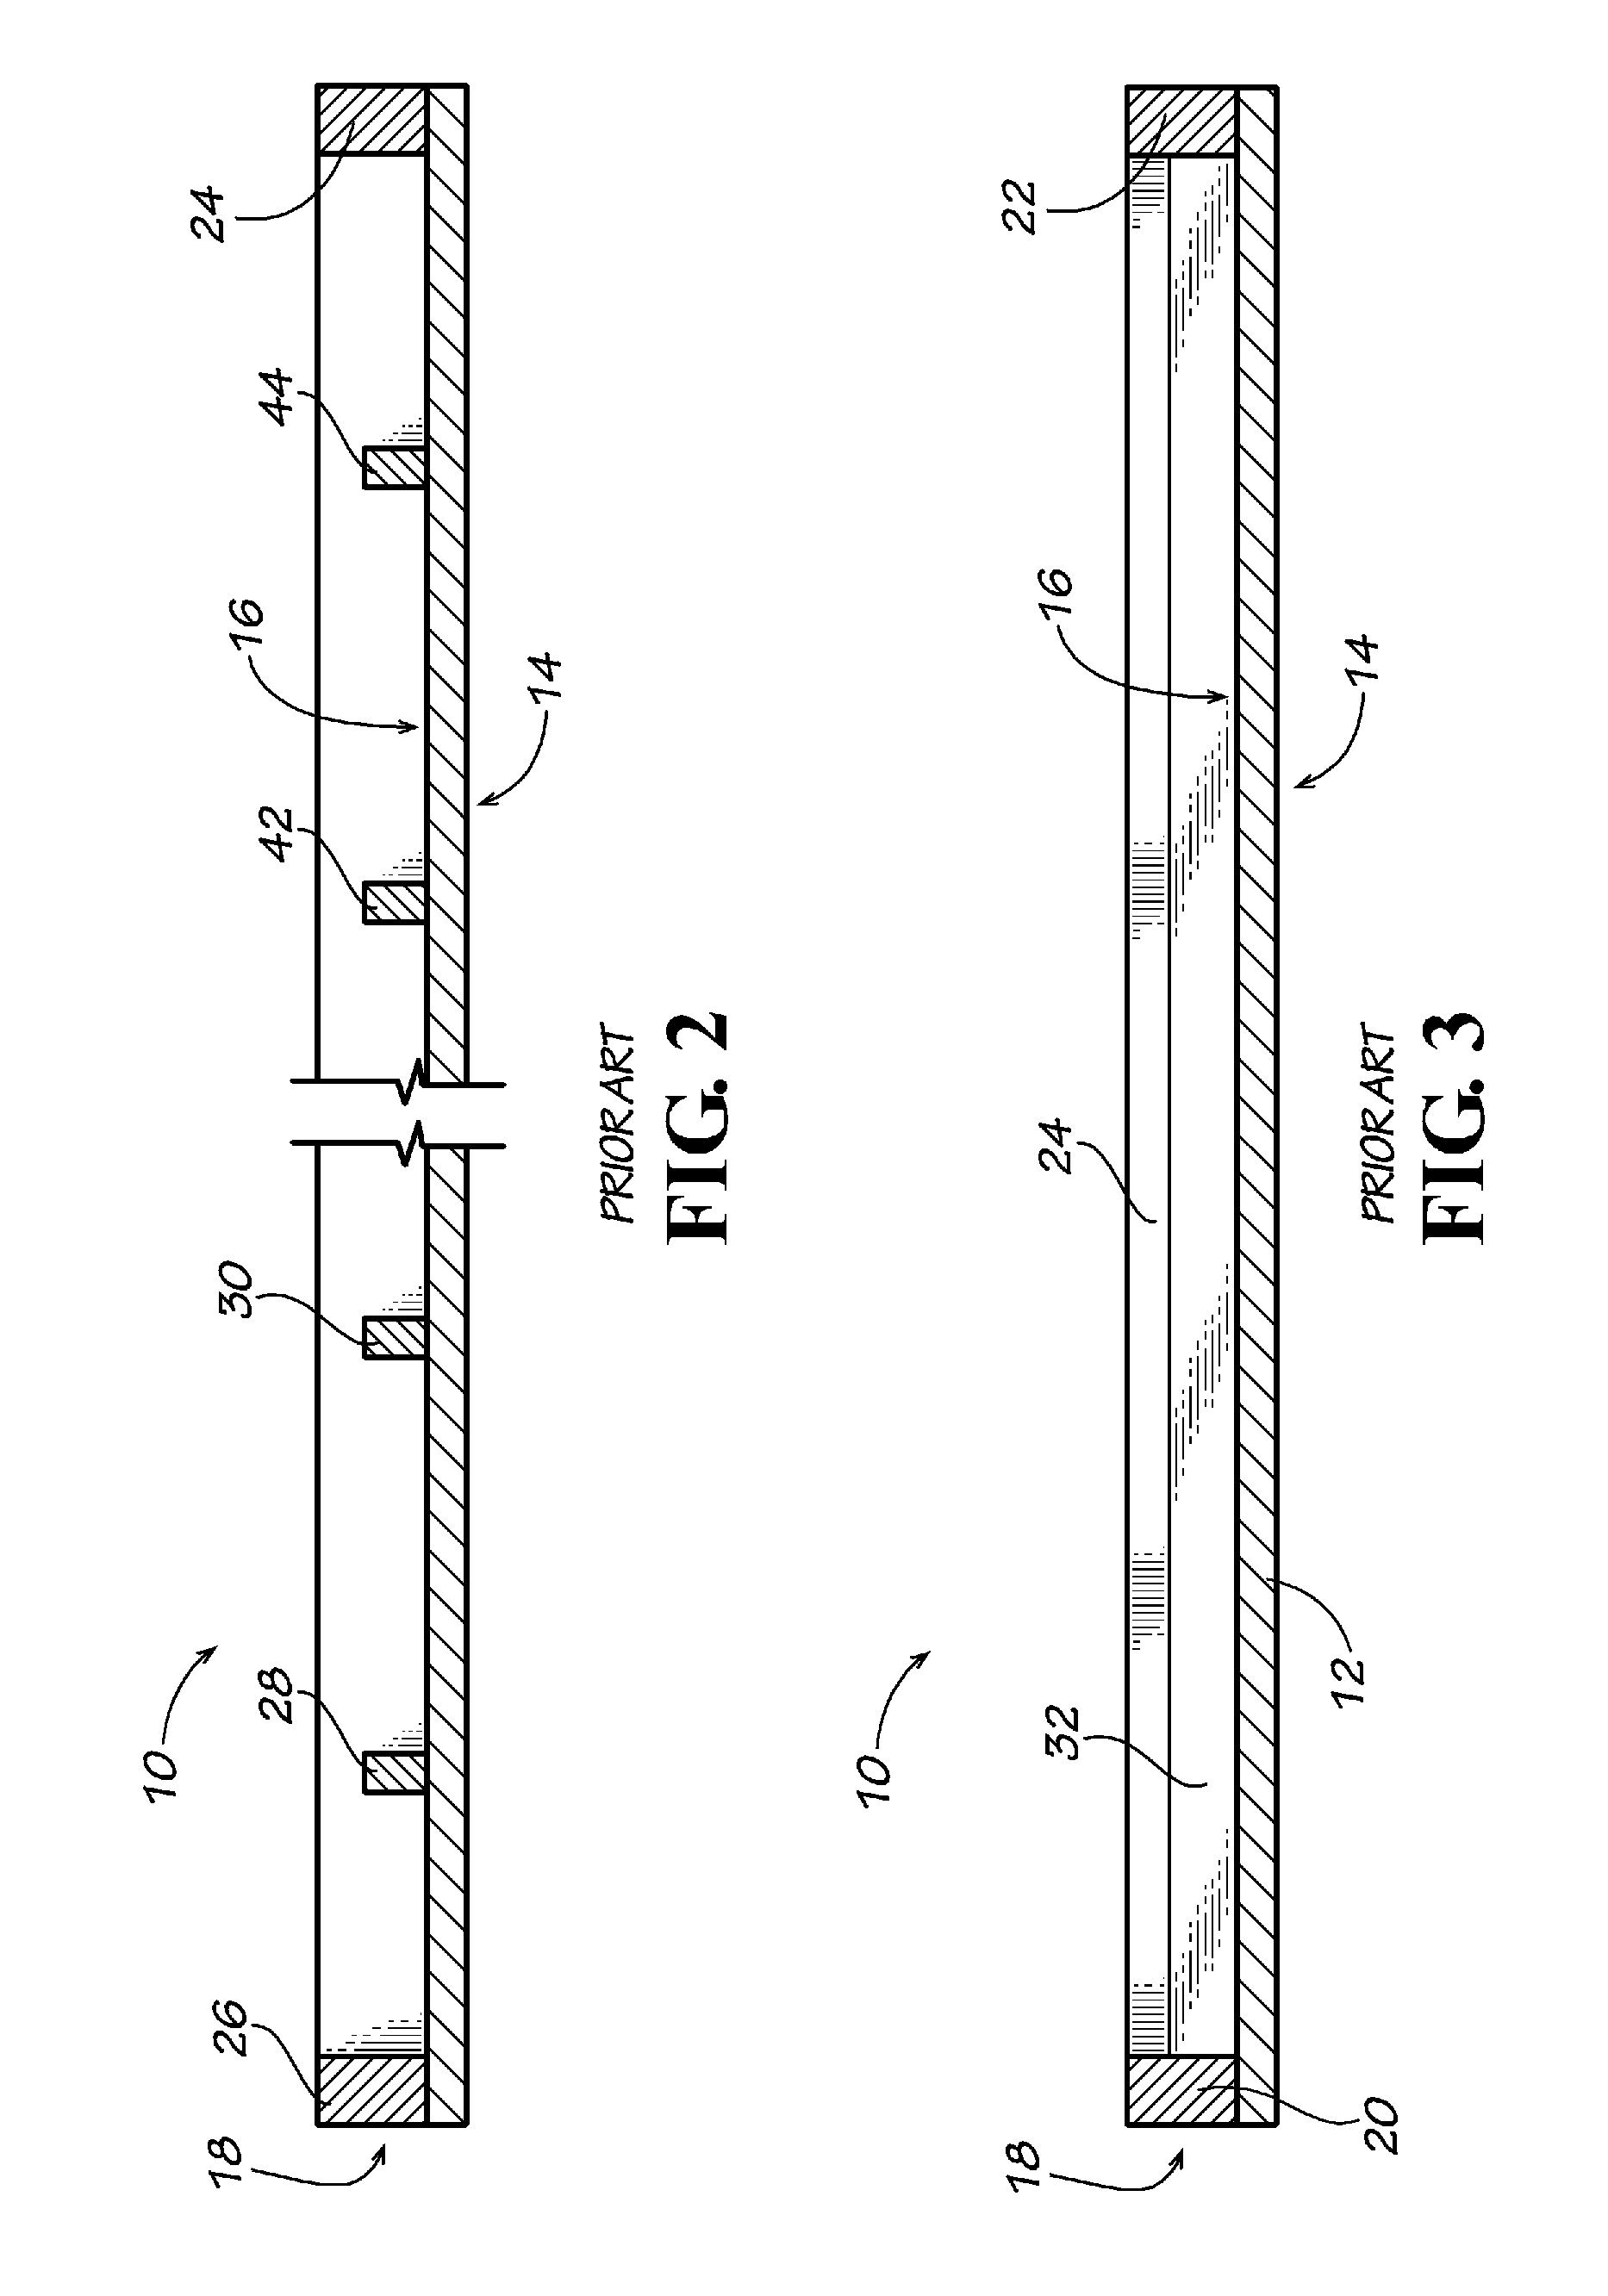 Removable composite insulated concrete form, insulated precast concrete table and method of accelerating concrete curing using same